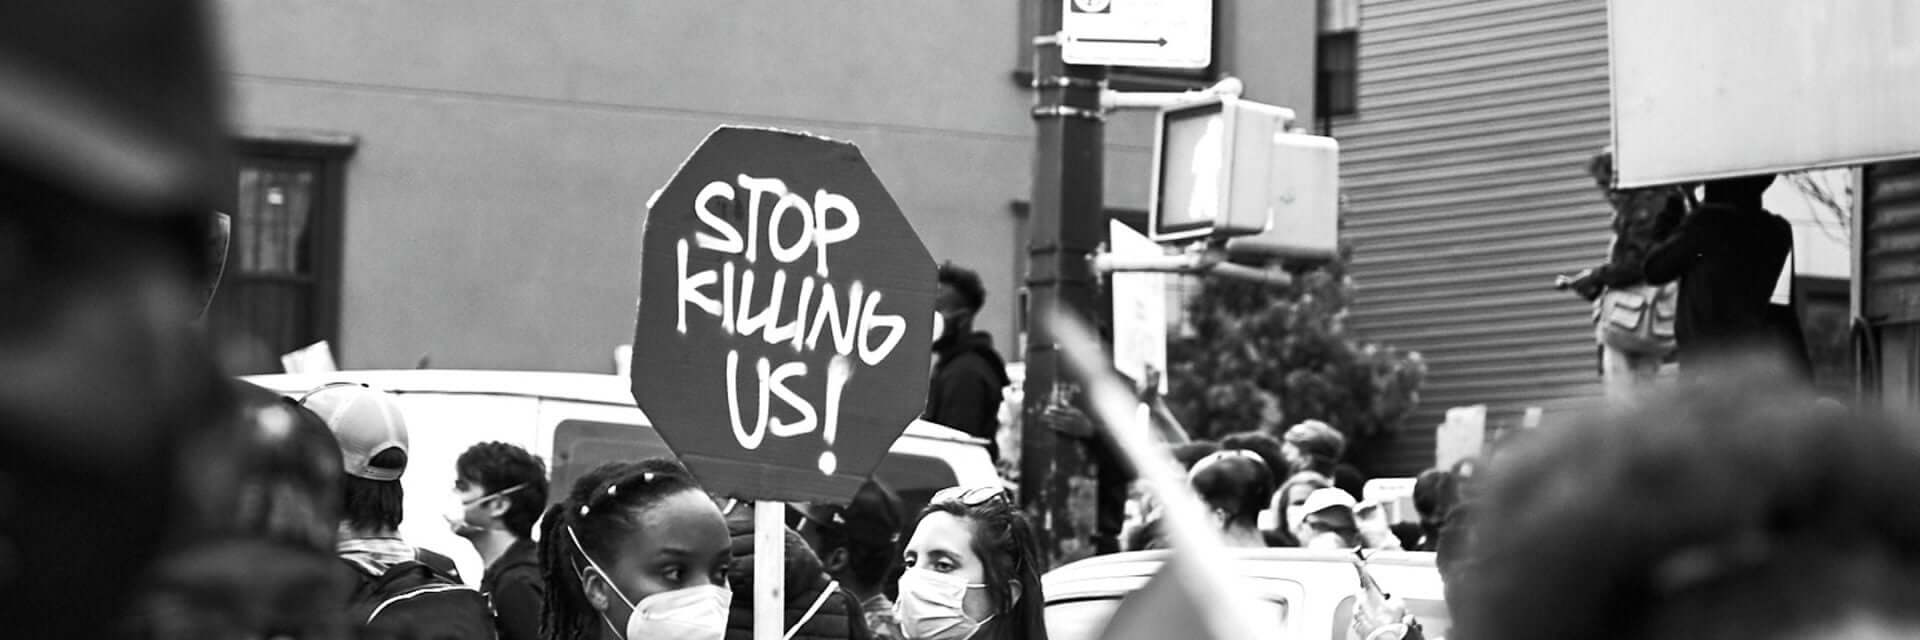 Defund the police protest with protestor holding stop sign shaped sign that says, Stop Killing Us